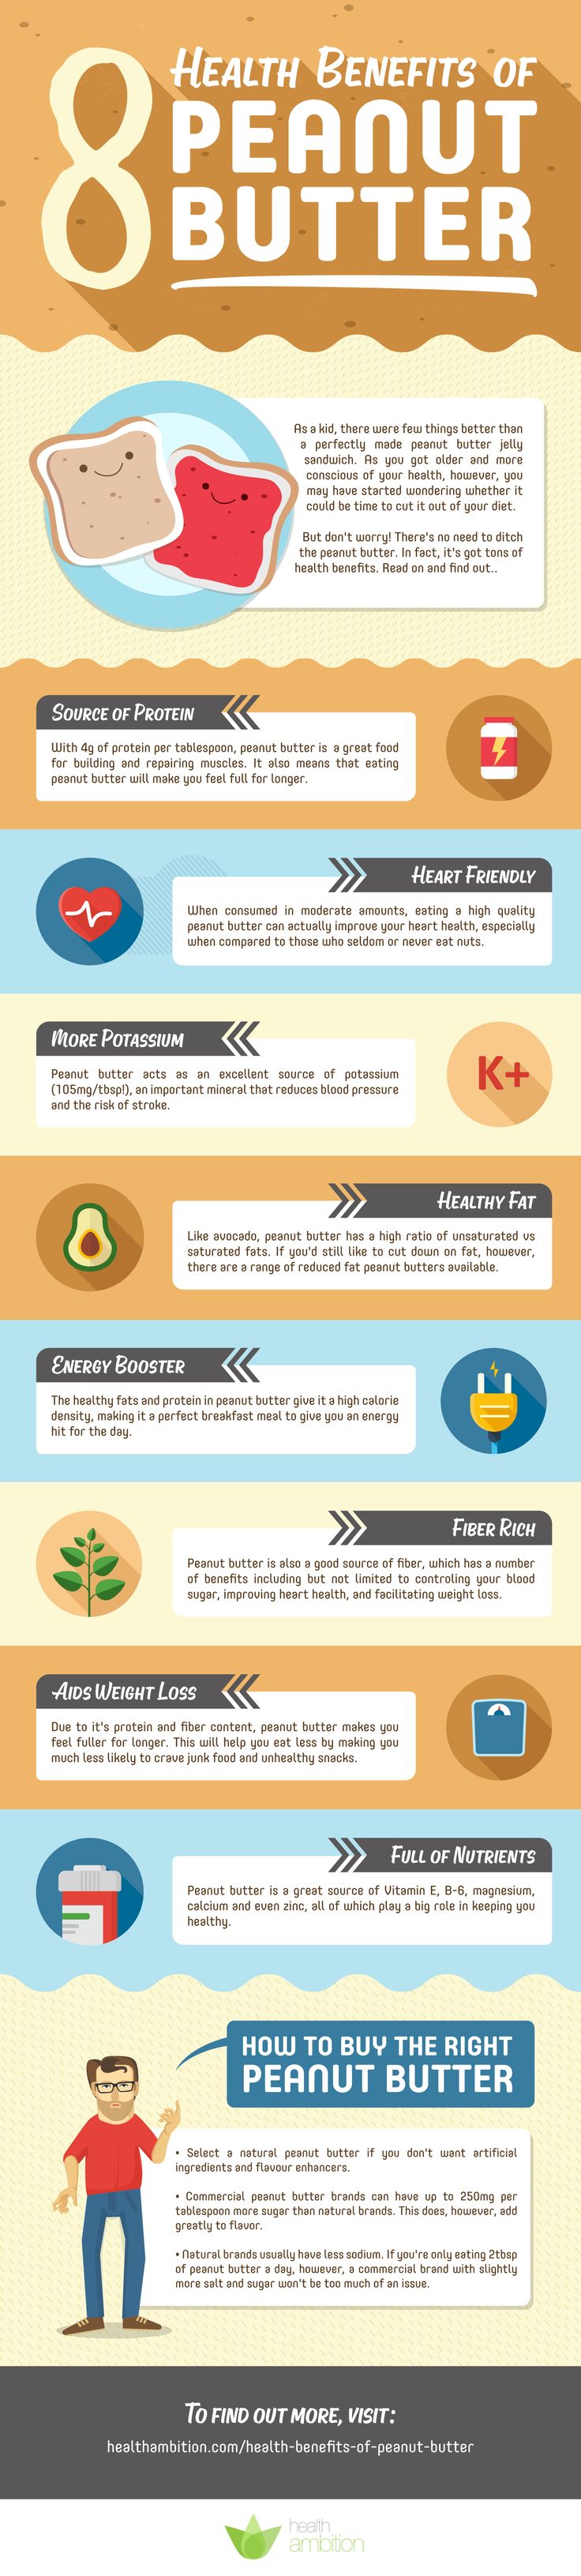 8 Reasons Why You Don’t Have To Give Up Peanut Butter Infographic